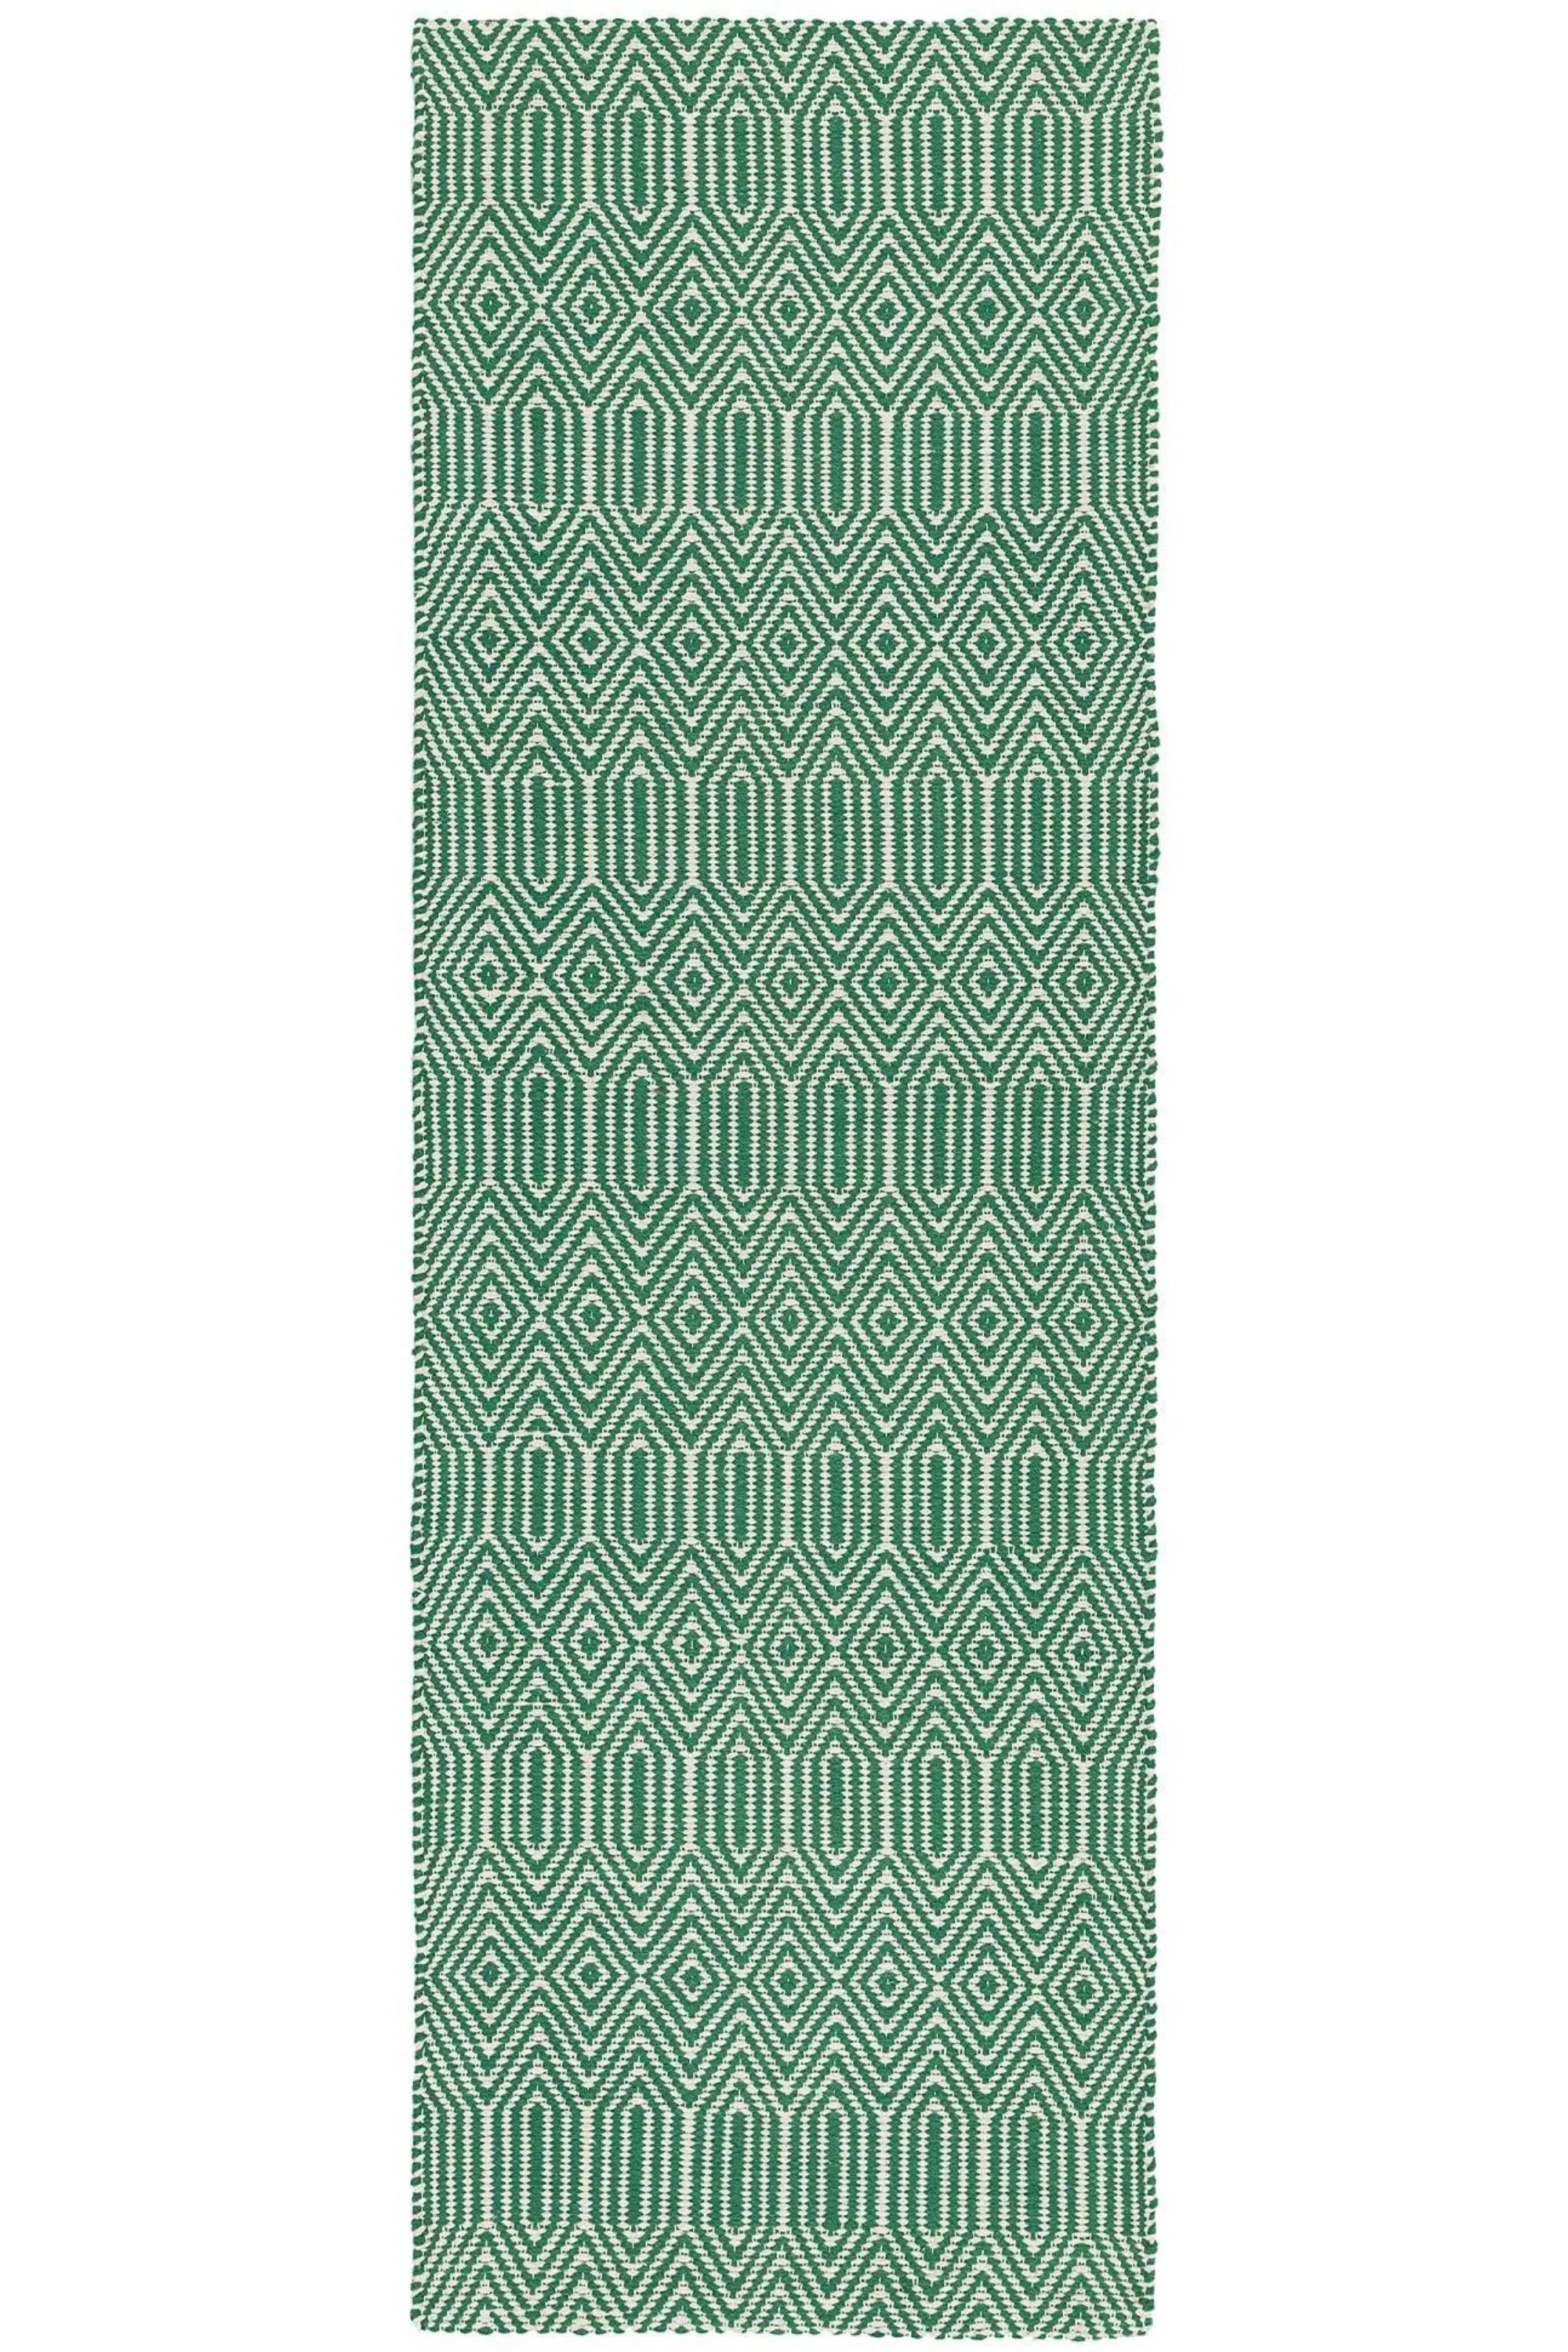 green and white runner with a geometric aztec design